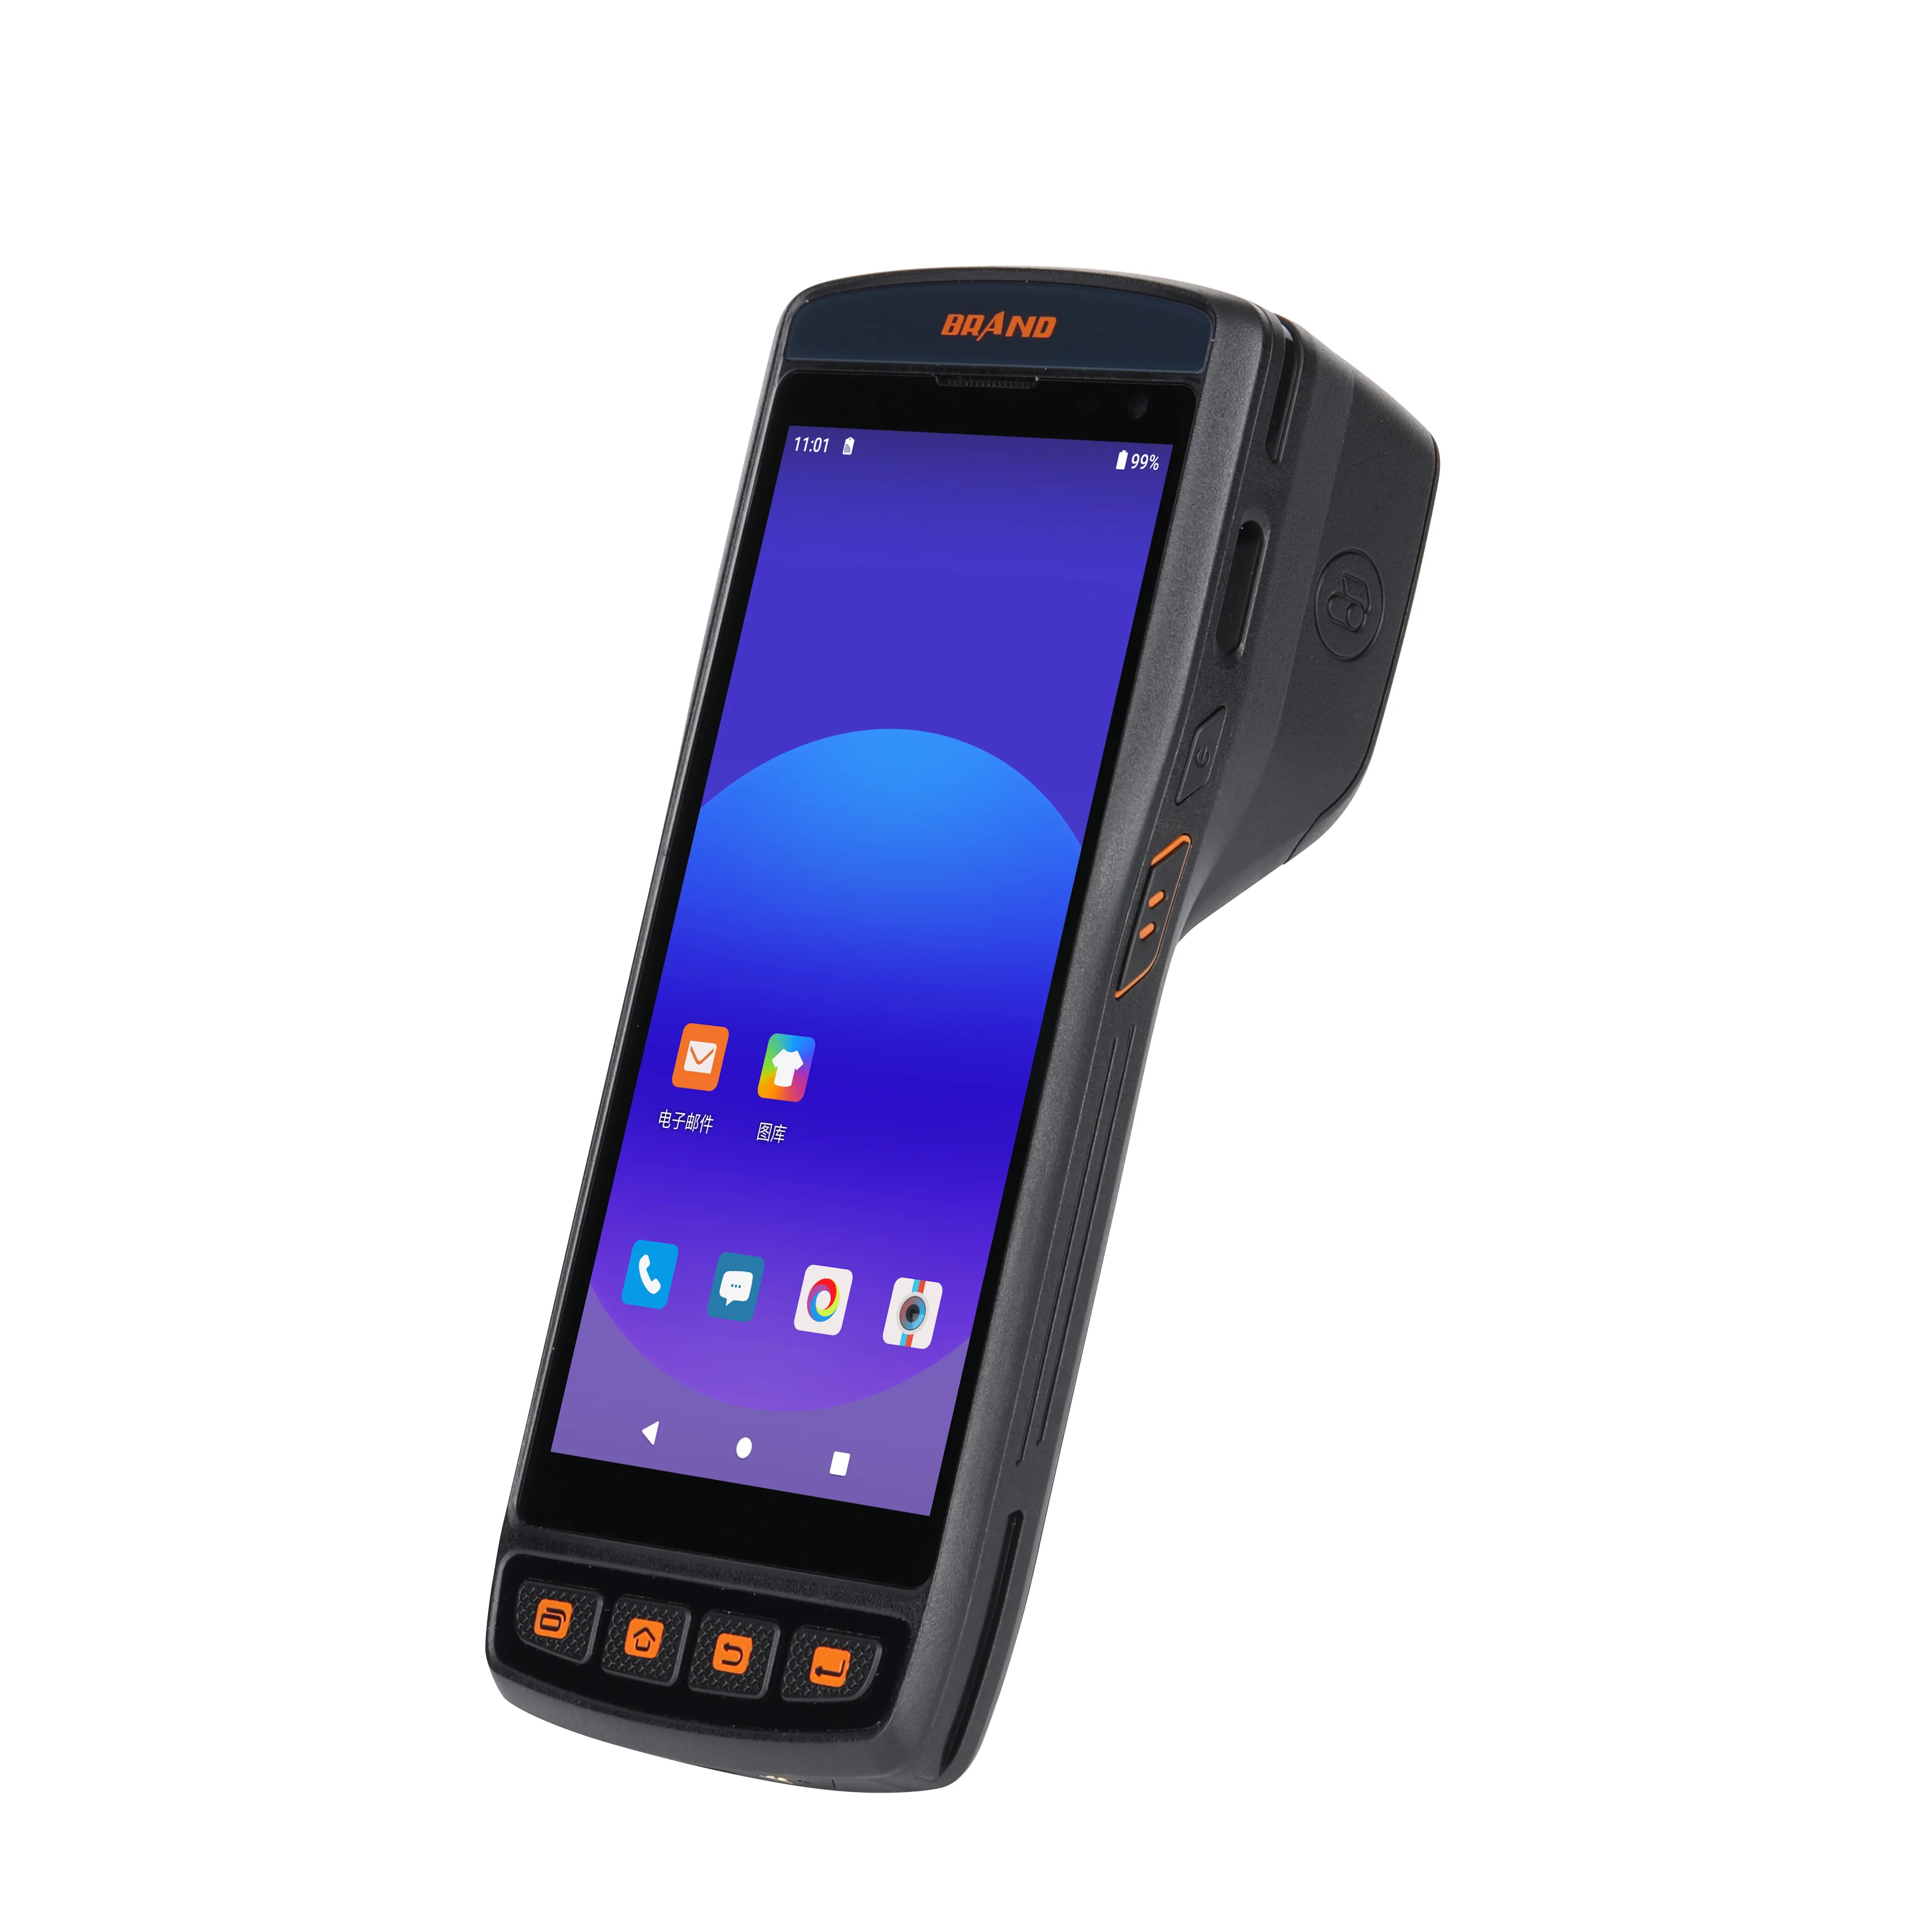 5.5'' IP65 Rugged Android PDAs Barcode Scanner Rugged Handheld Barcode Reader industrial 2.0 ghz nfc Data Collectors